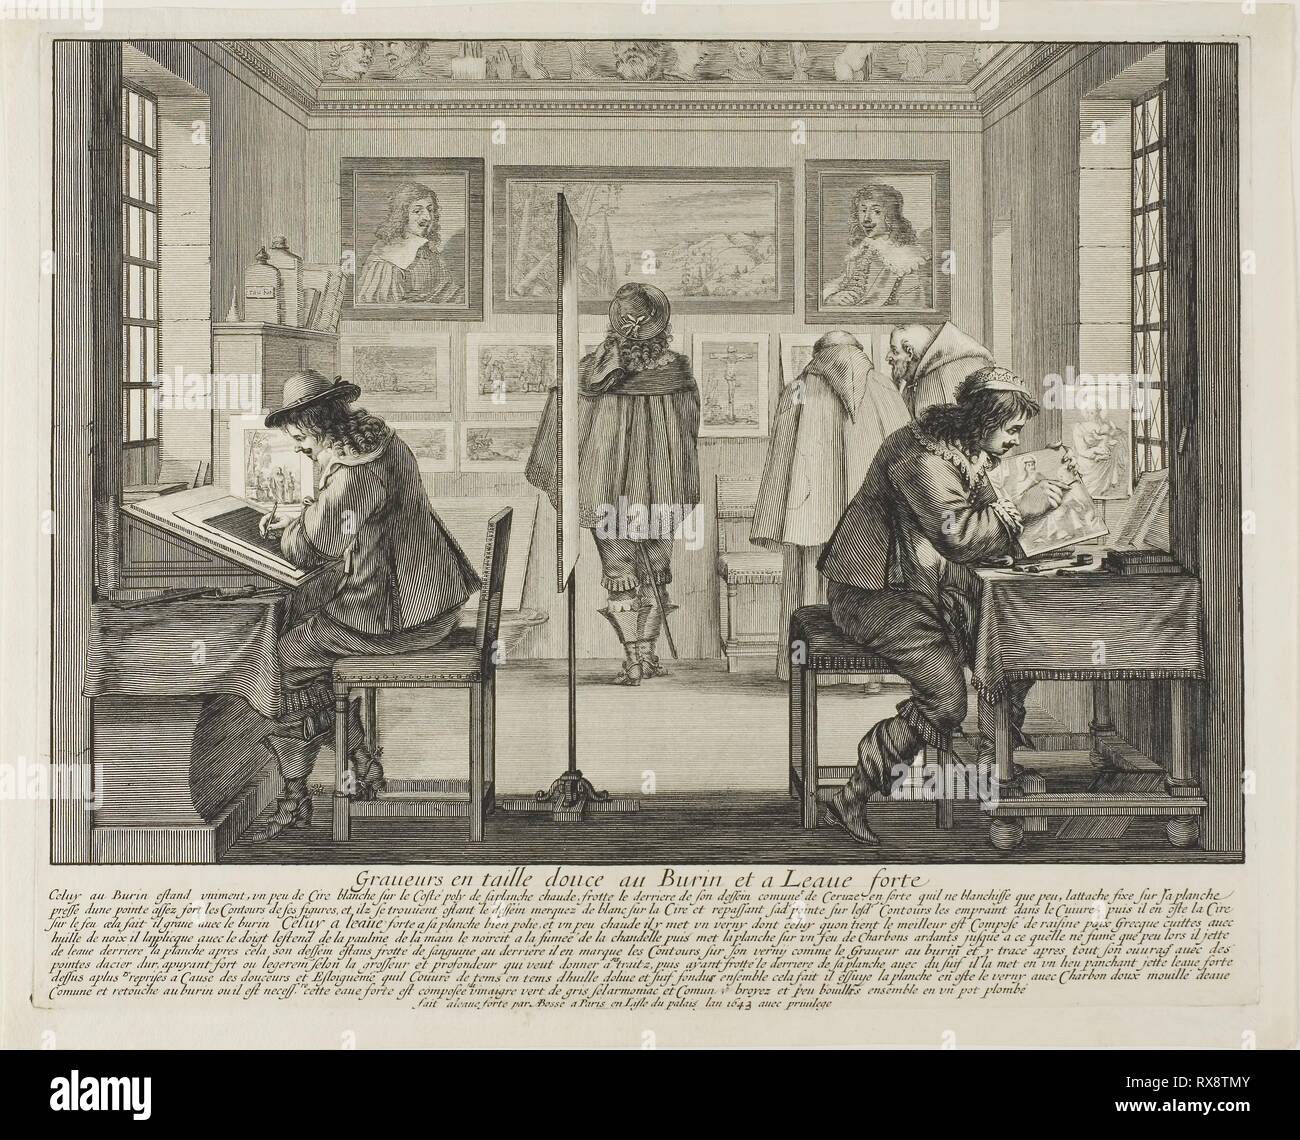 The Engraver and the Etcher. Abraham Bosse; French, 1602-1676. Date: 1642. Dimensions: 257 × 324 mm (plate); 275 × 340 mm (sheet). Etching on ivory laid paper. Origin: France. Museum: The Chicago Art Institute. Stock Photo